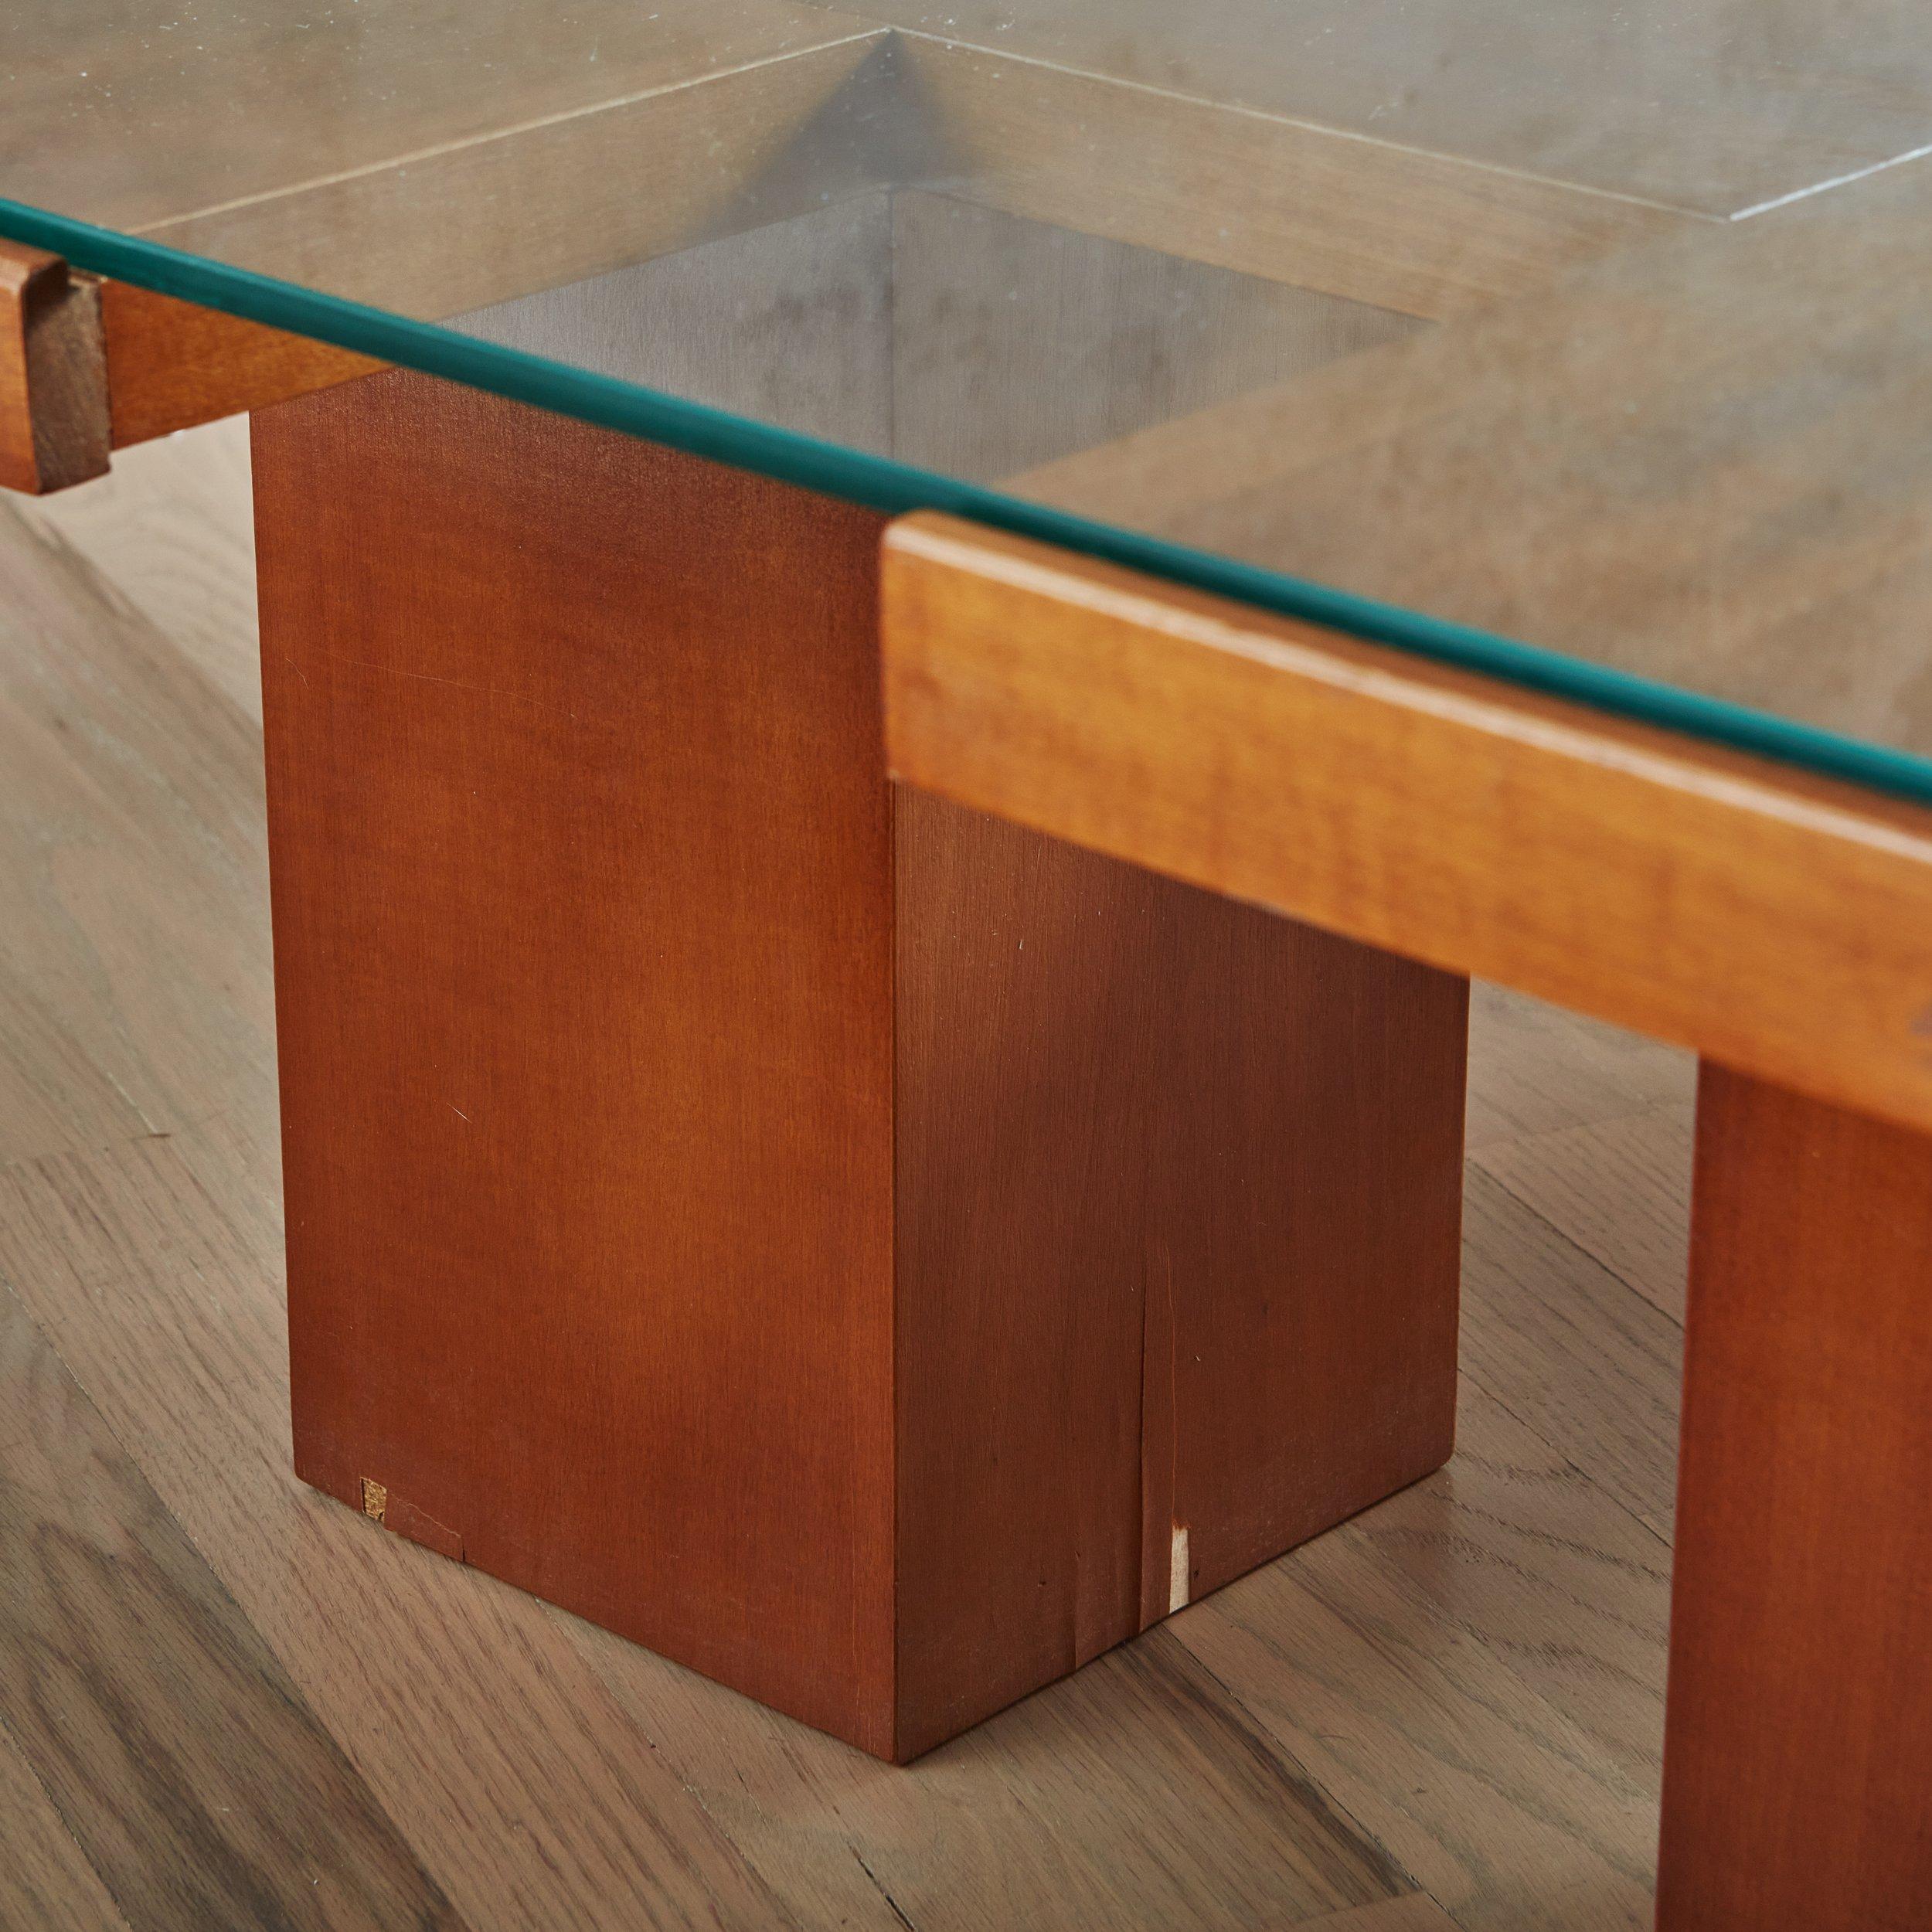 Mid-20th Century Ash Wood + Glass Coffee Table Attributed to Marco Zanuso for Poggi, Italy 1960s For Sale